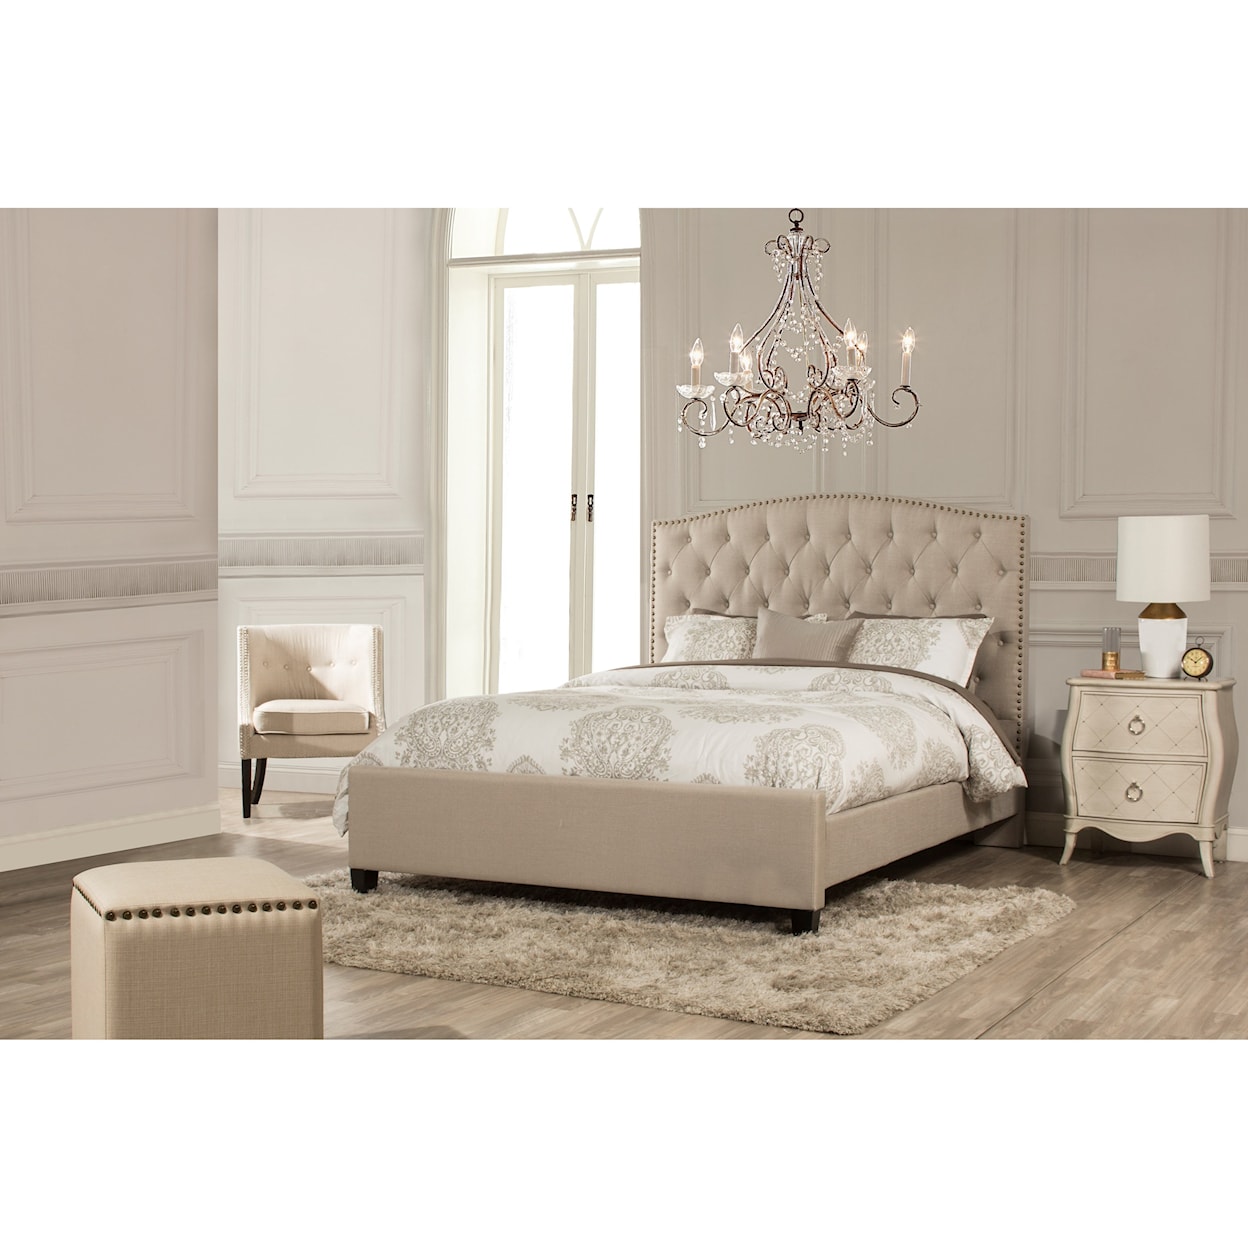 Hillsdale Lila California King Upholstered Bed